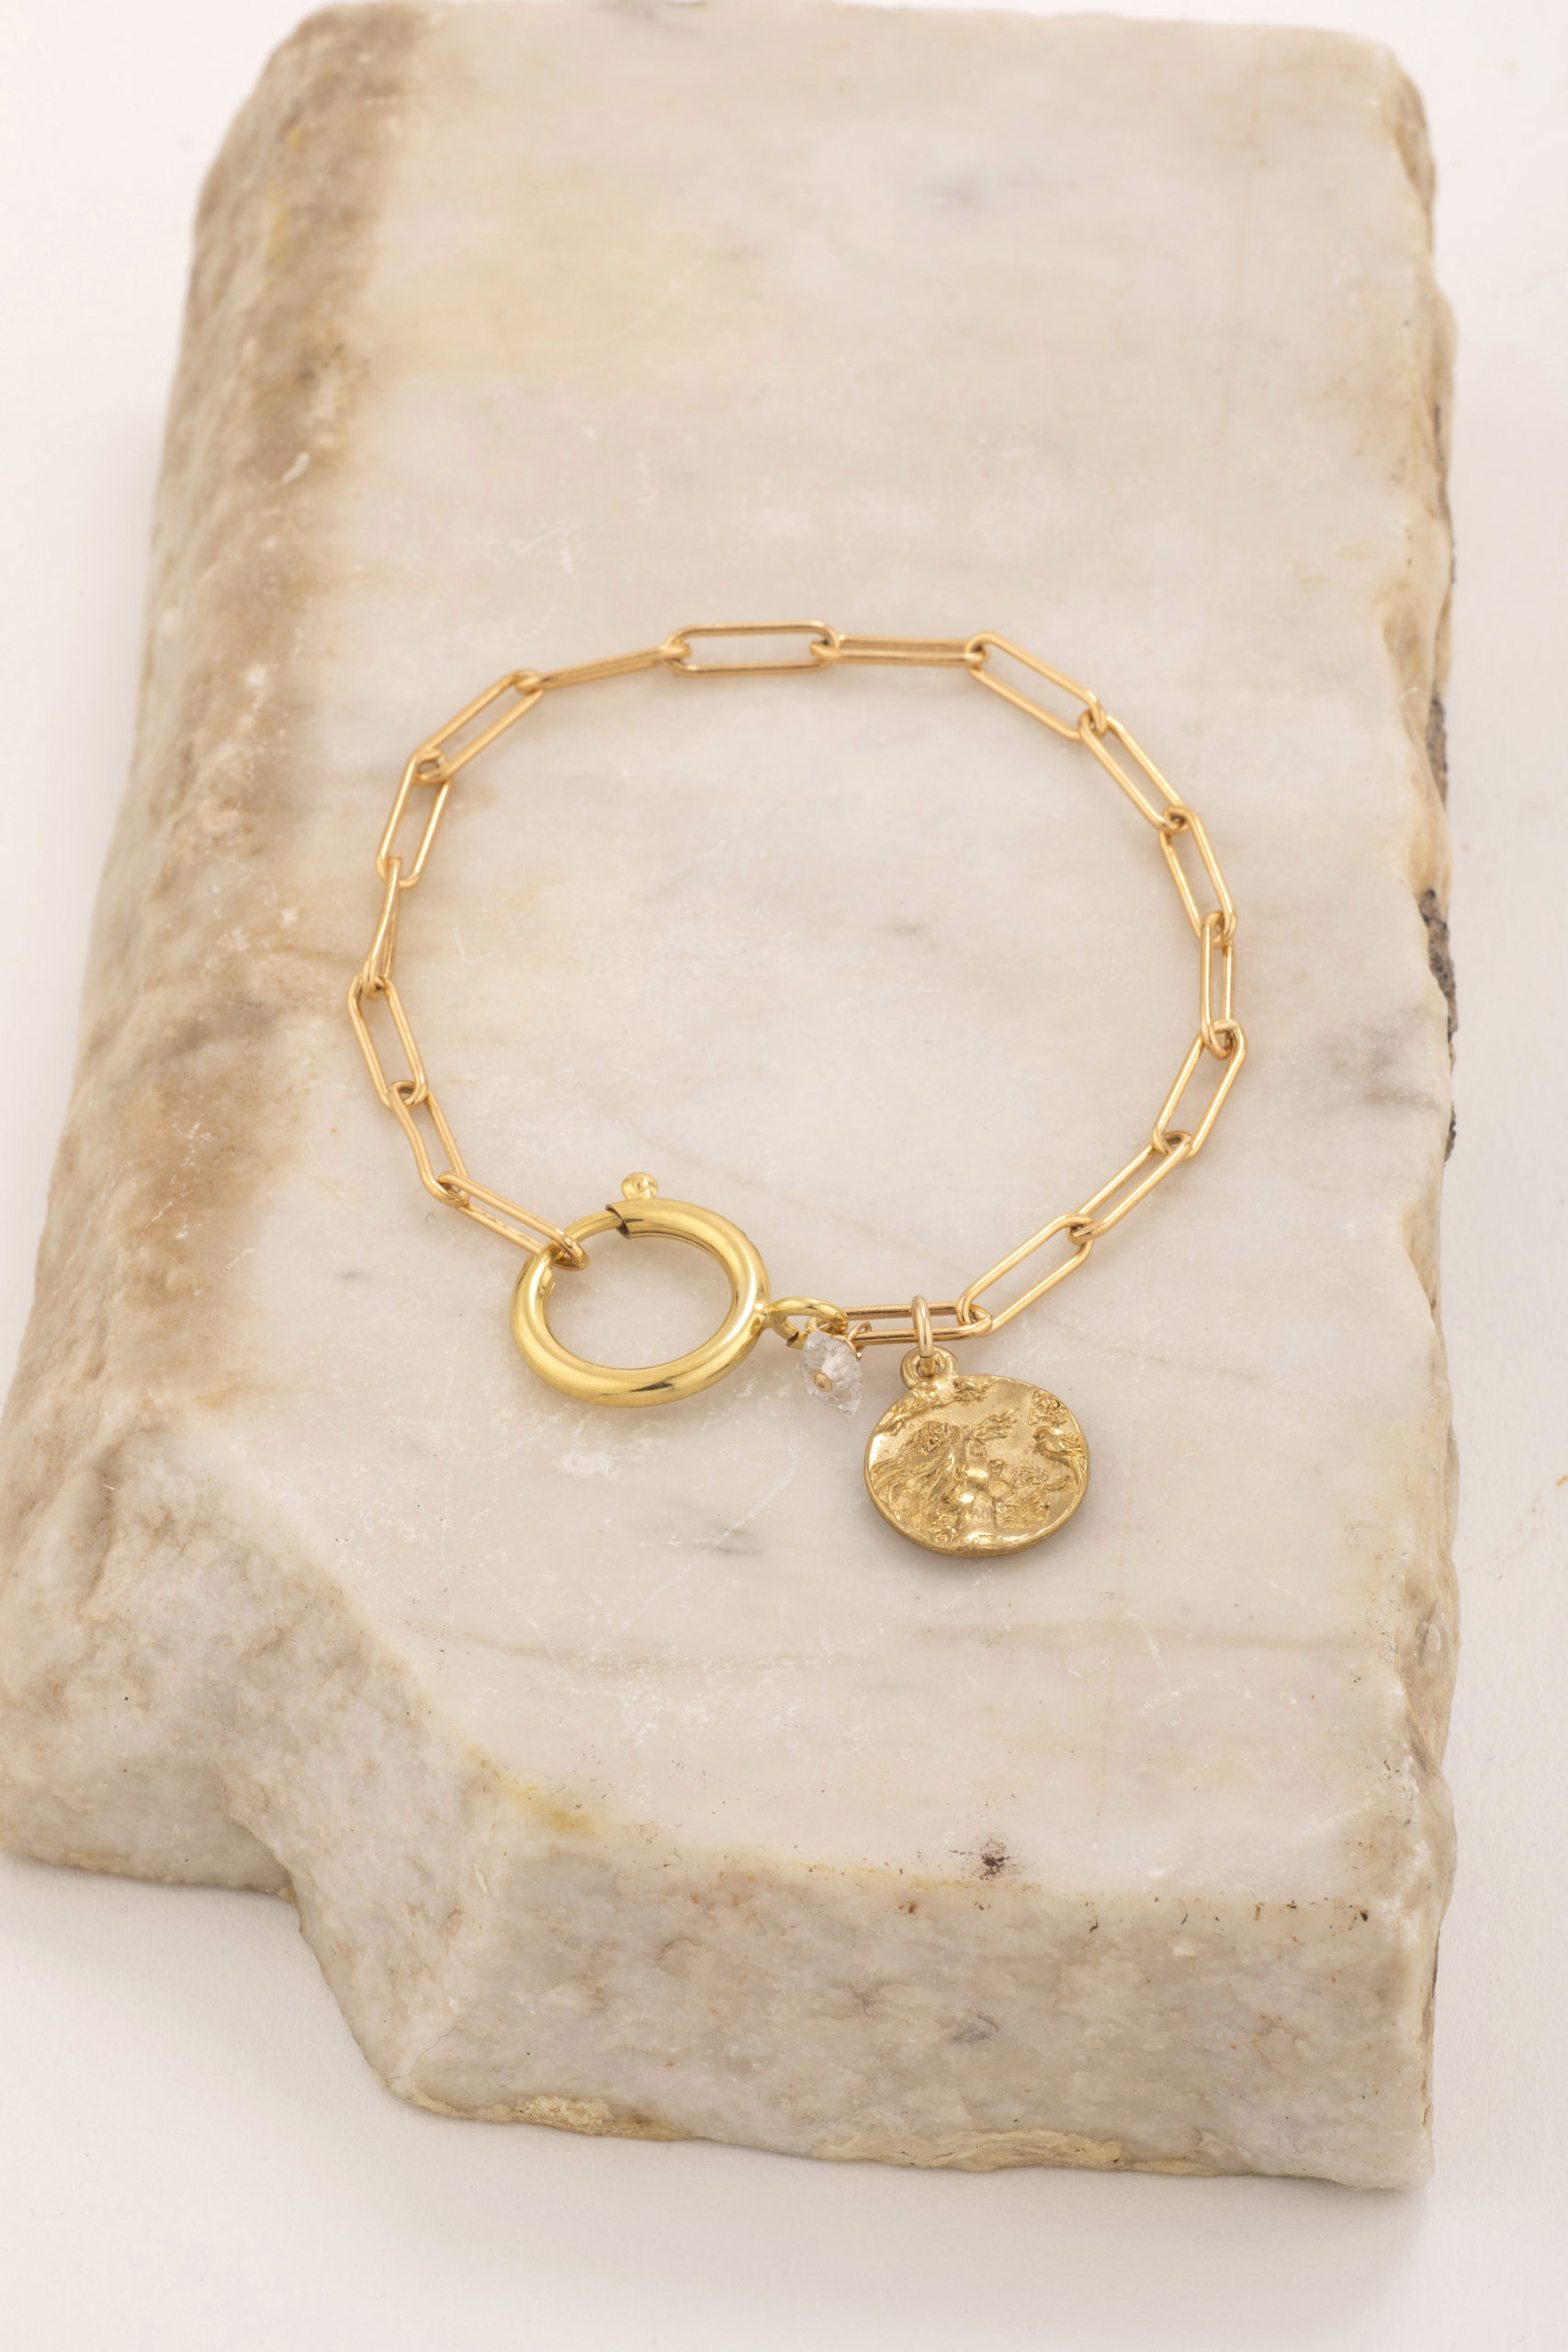 Featured image for “Yama Coin Gold Bracelet”